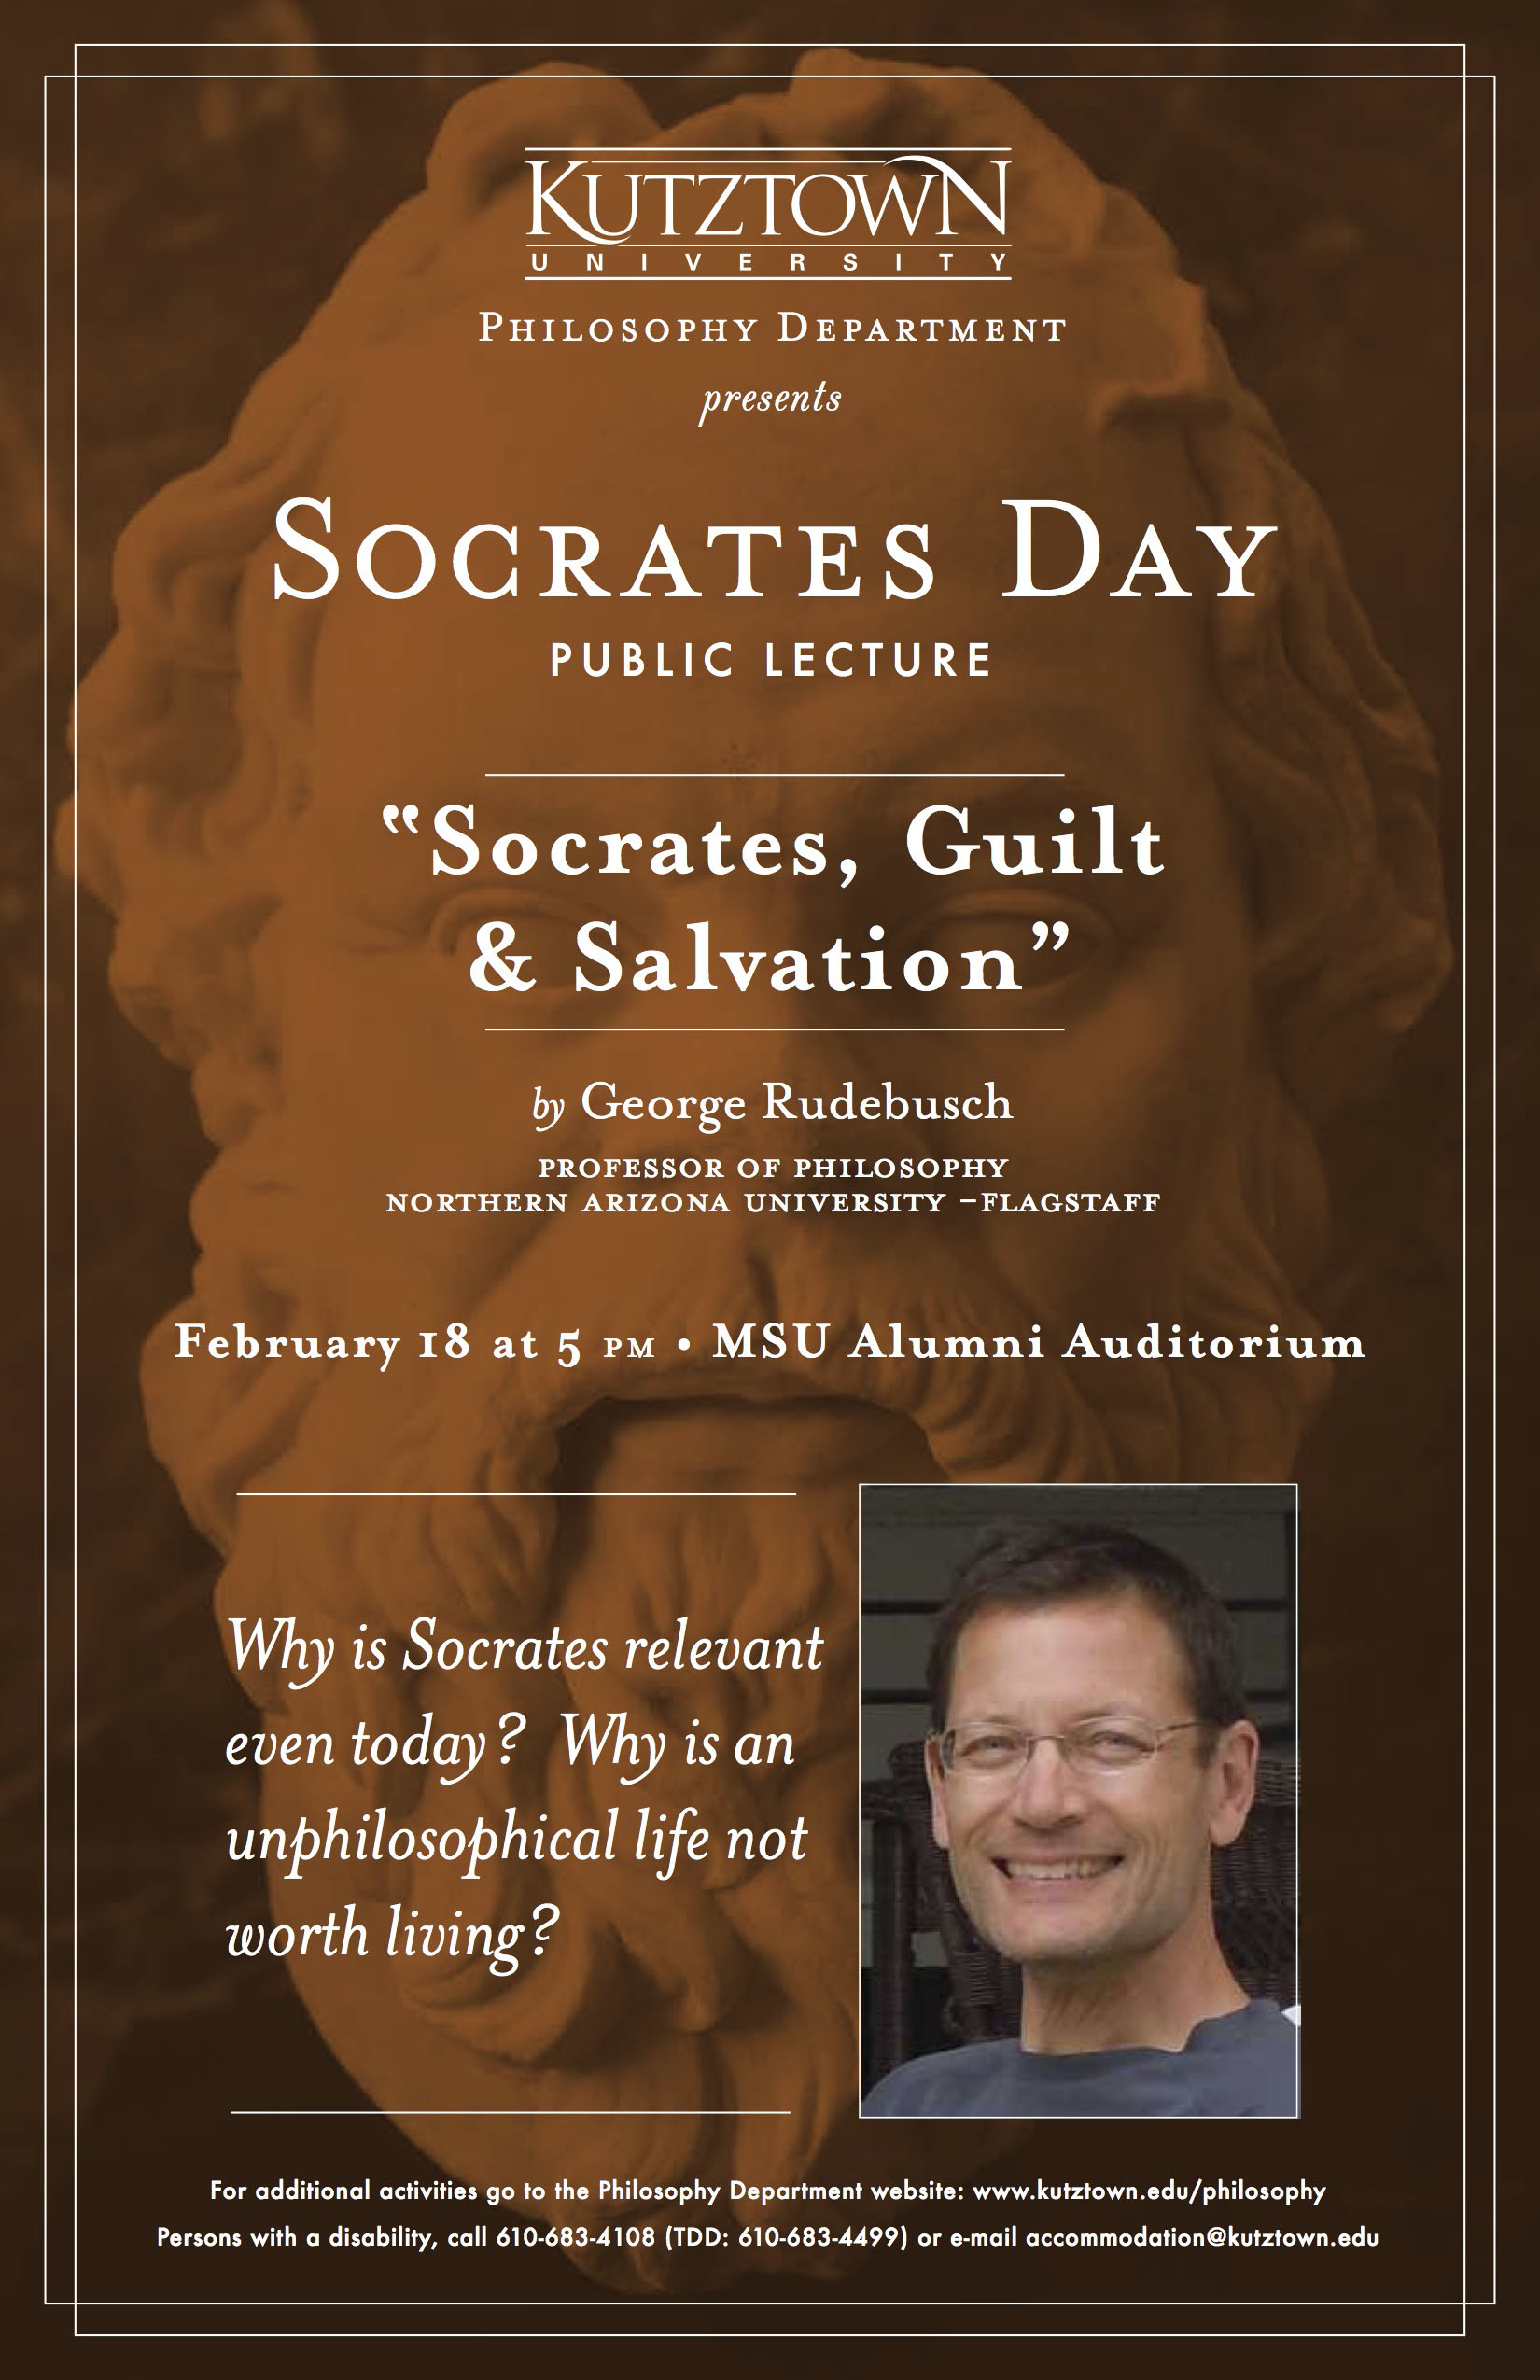 A Poster of Philosopher’s Day 2013[Socrates Day public lecture: “Socrates, Guilt & Salvation”]; by Dr. George Rudebusch